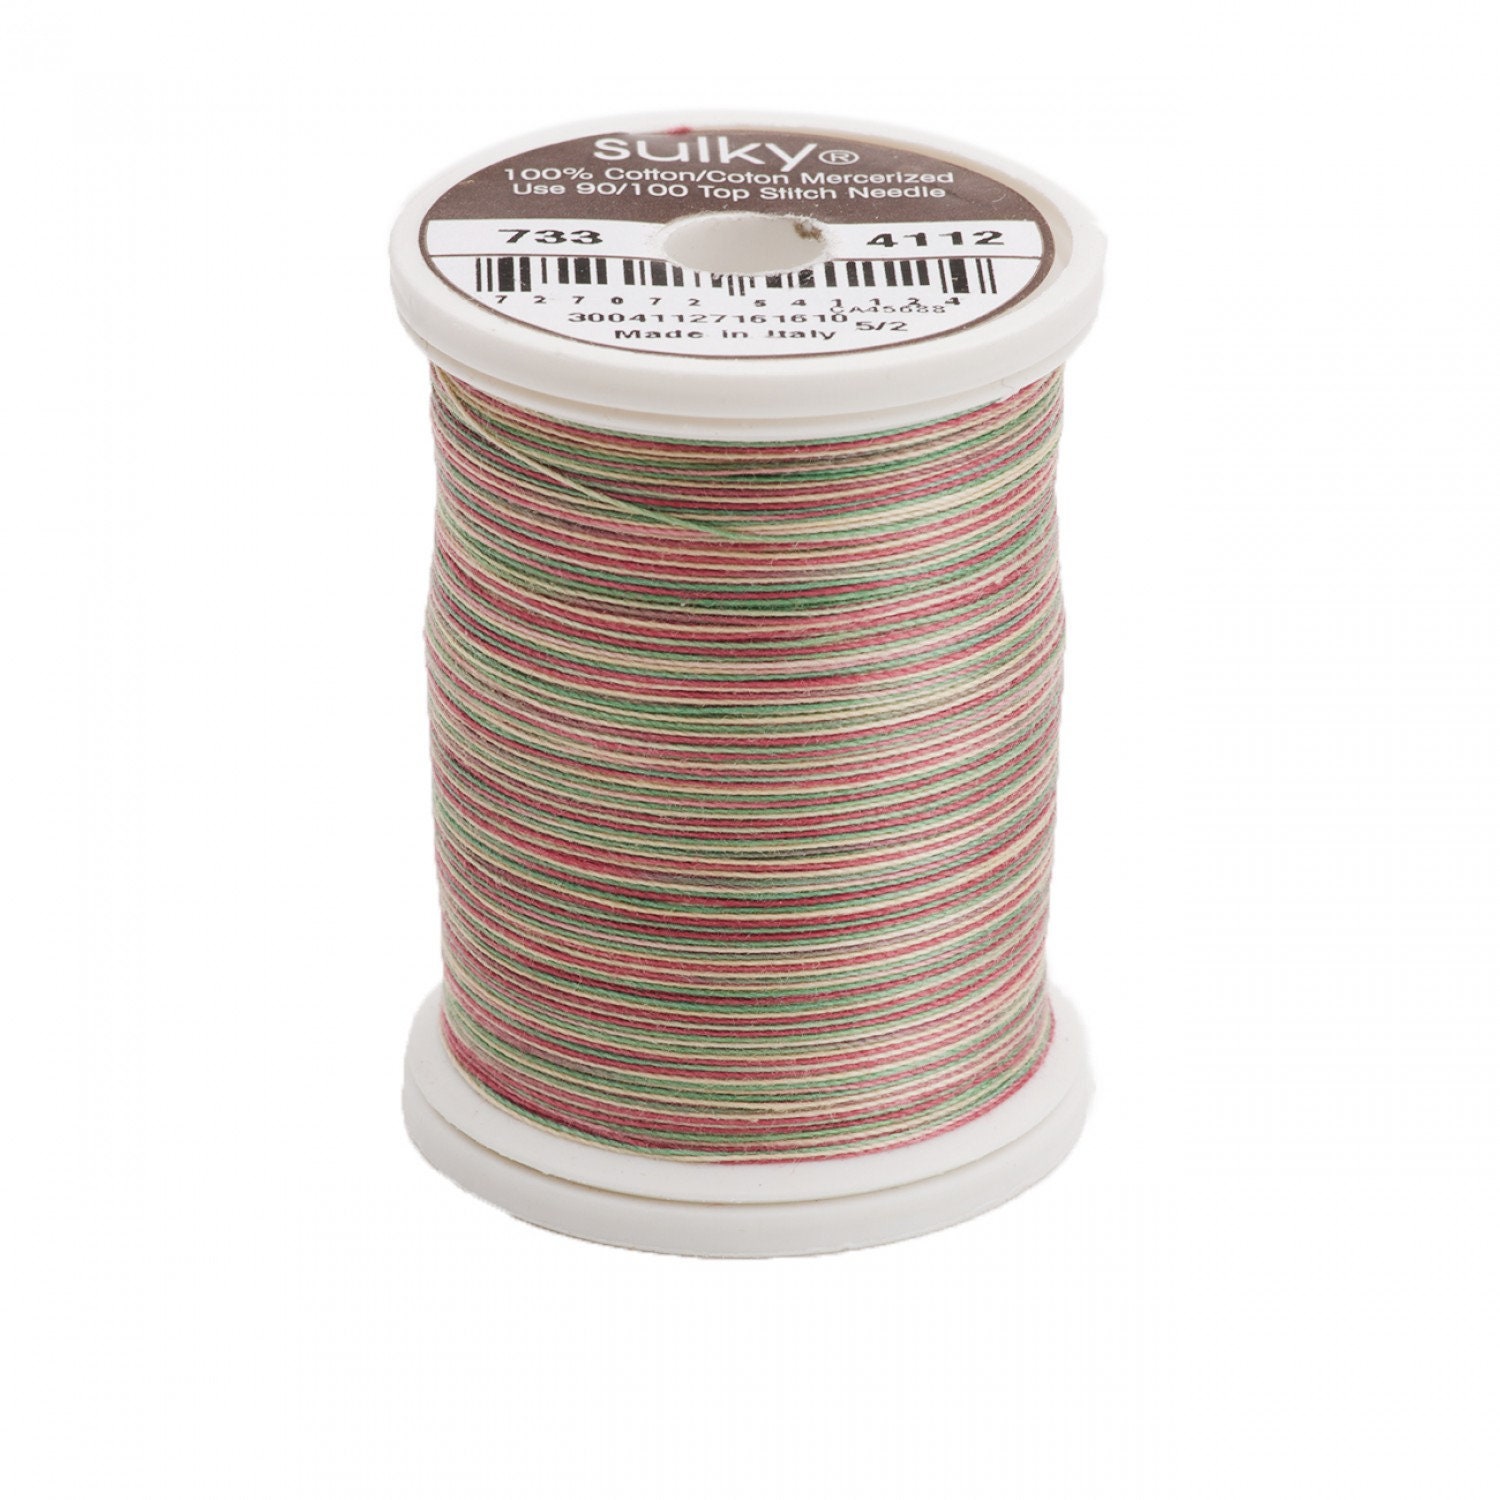 Sulky of America 30wt 18 Color Cotton Thread Starter Pack, 500 yd